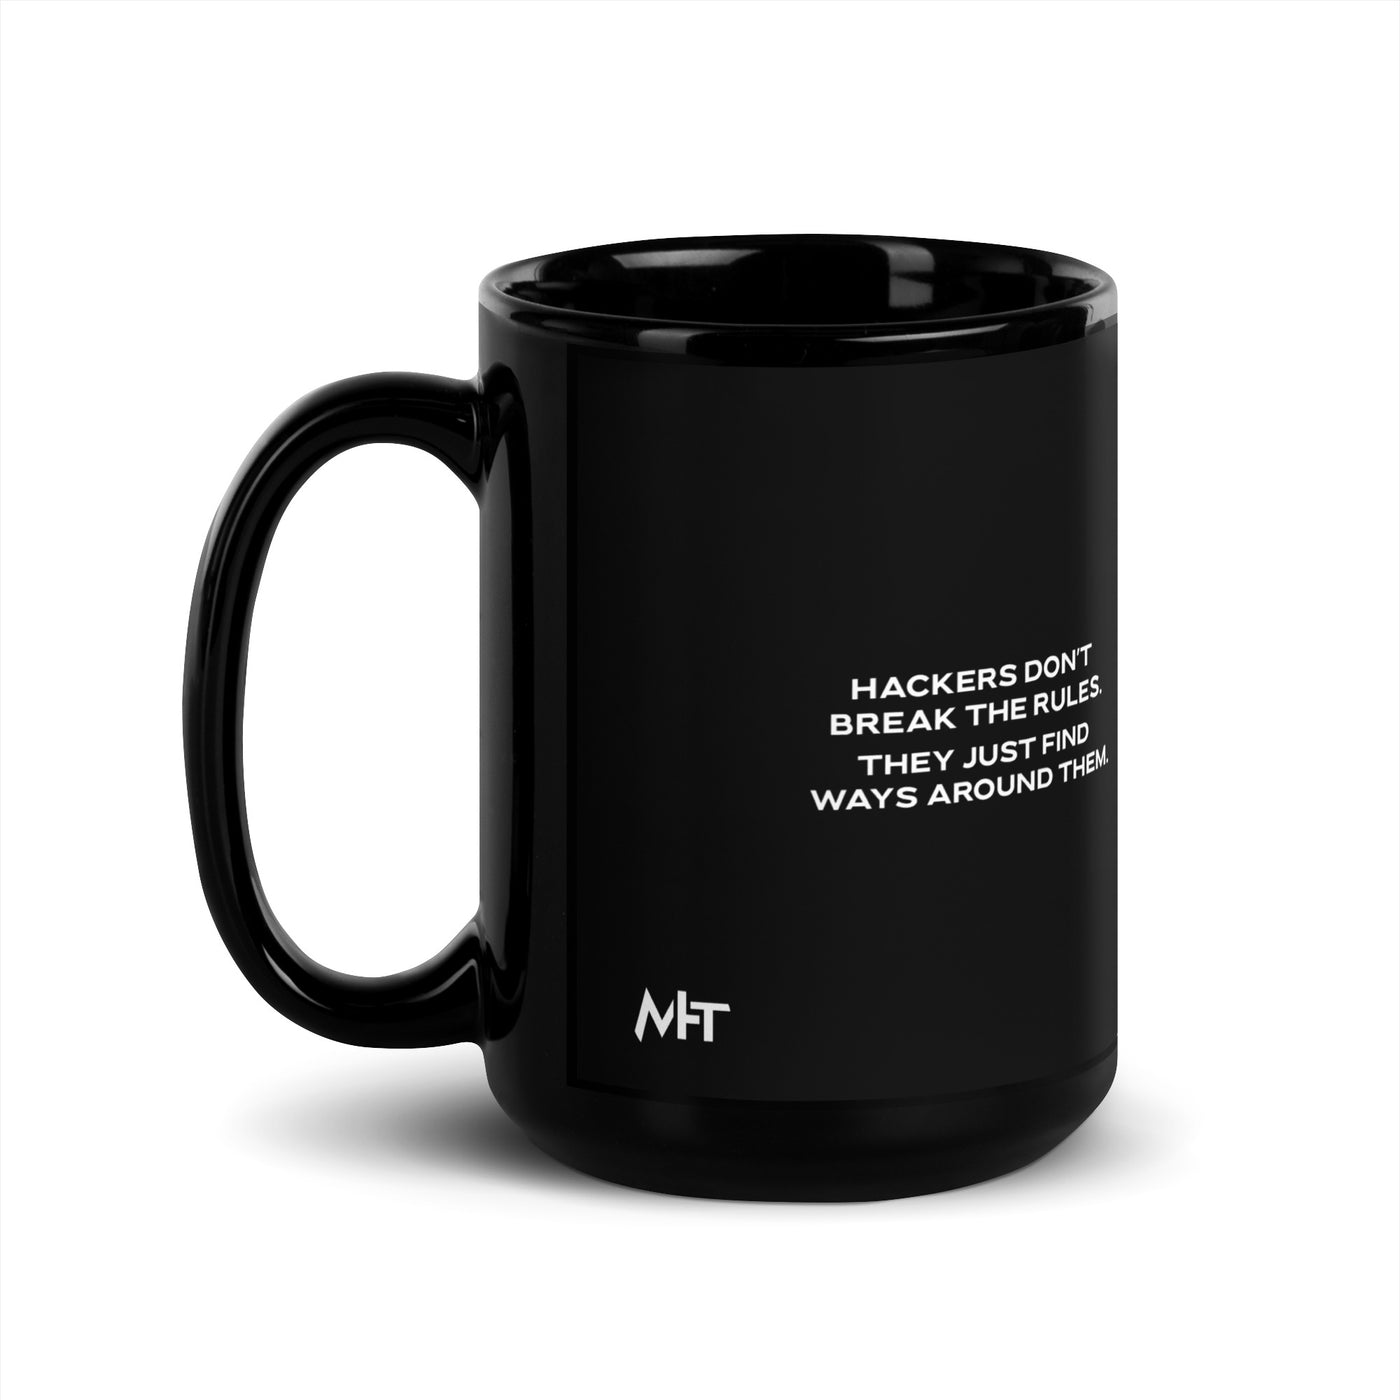 Hackers don't break the rules, they just find ways around them V2 - Black Glossy Mug